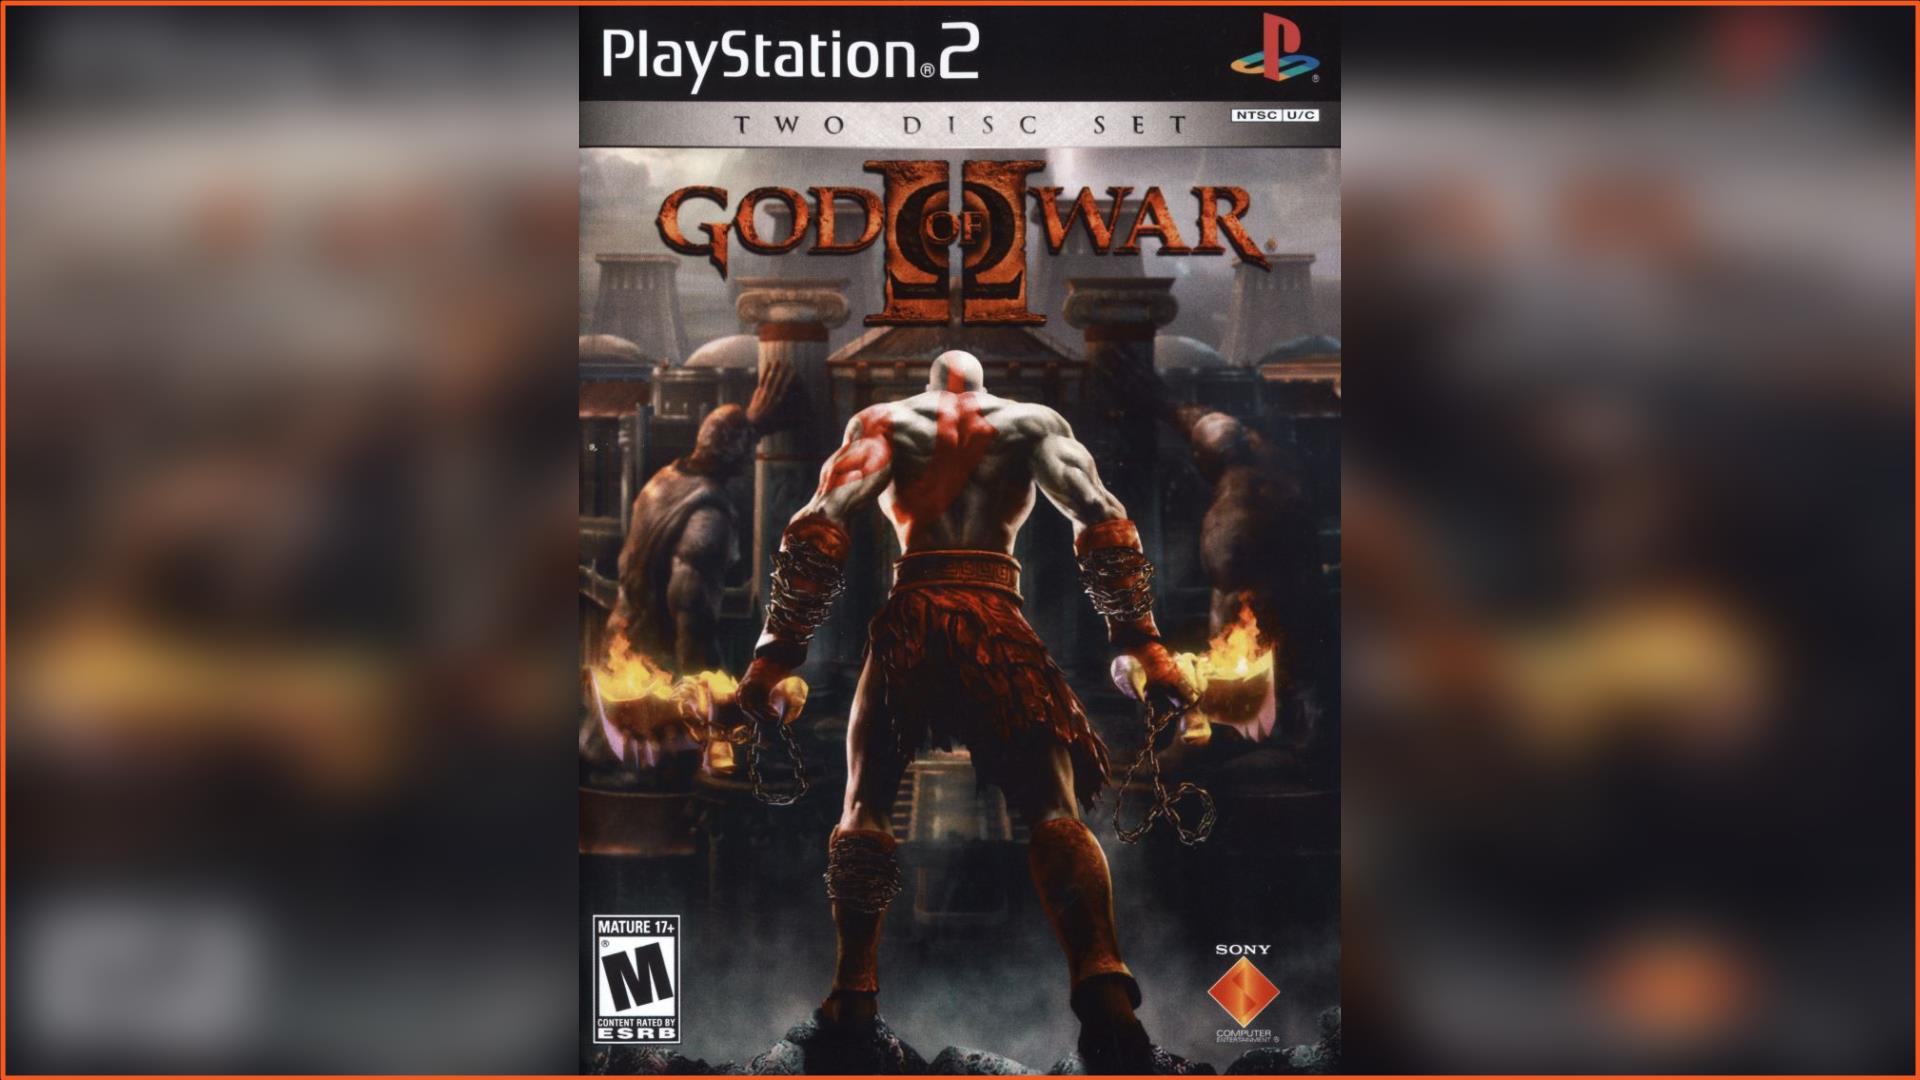 Download God Of War 2 APK AETHERSX2 ROM Highly Compressed